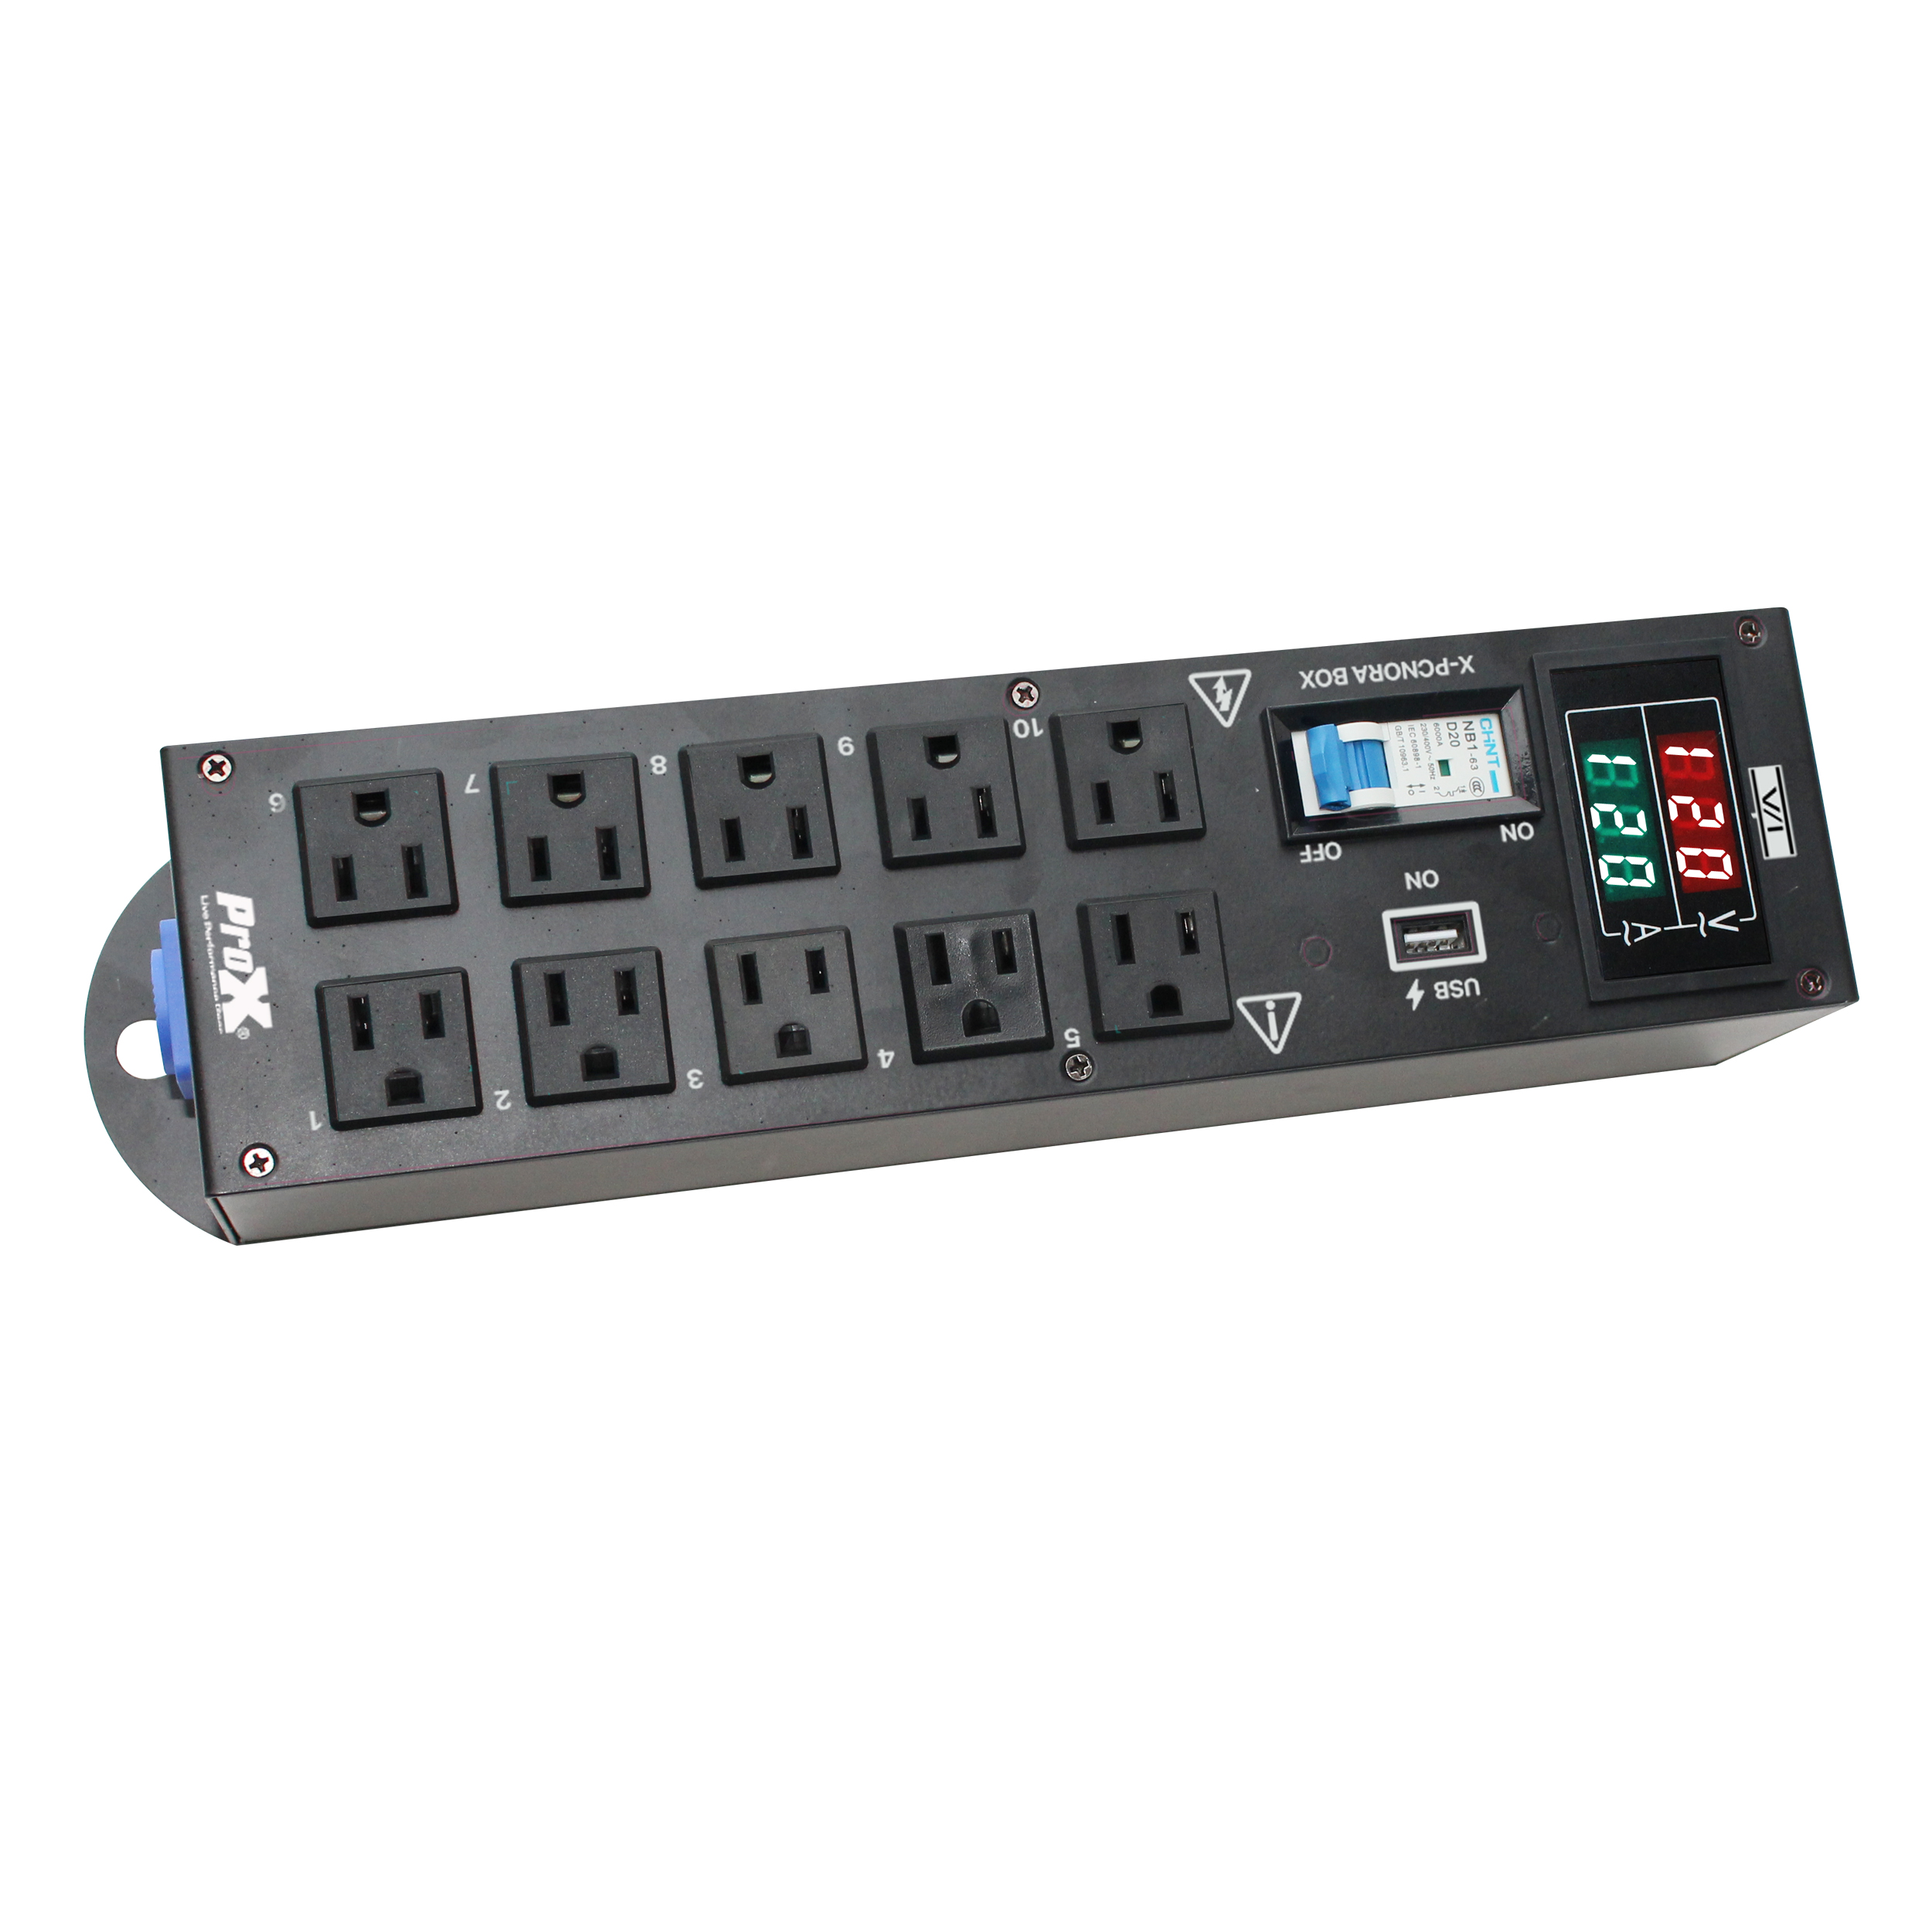 ProX X-PCNORABOX Power Center 10 Way Power Distribution Compact